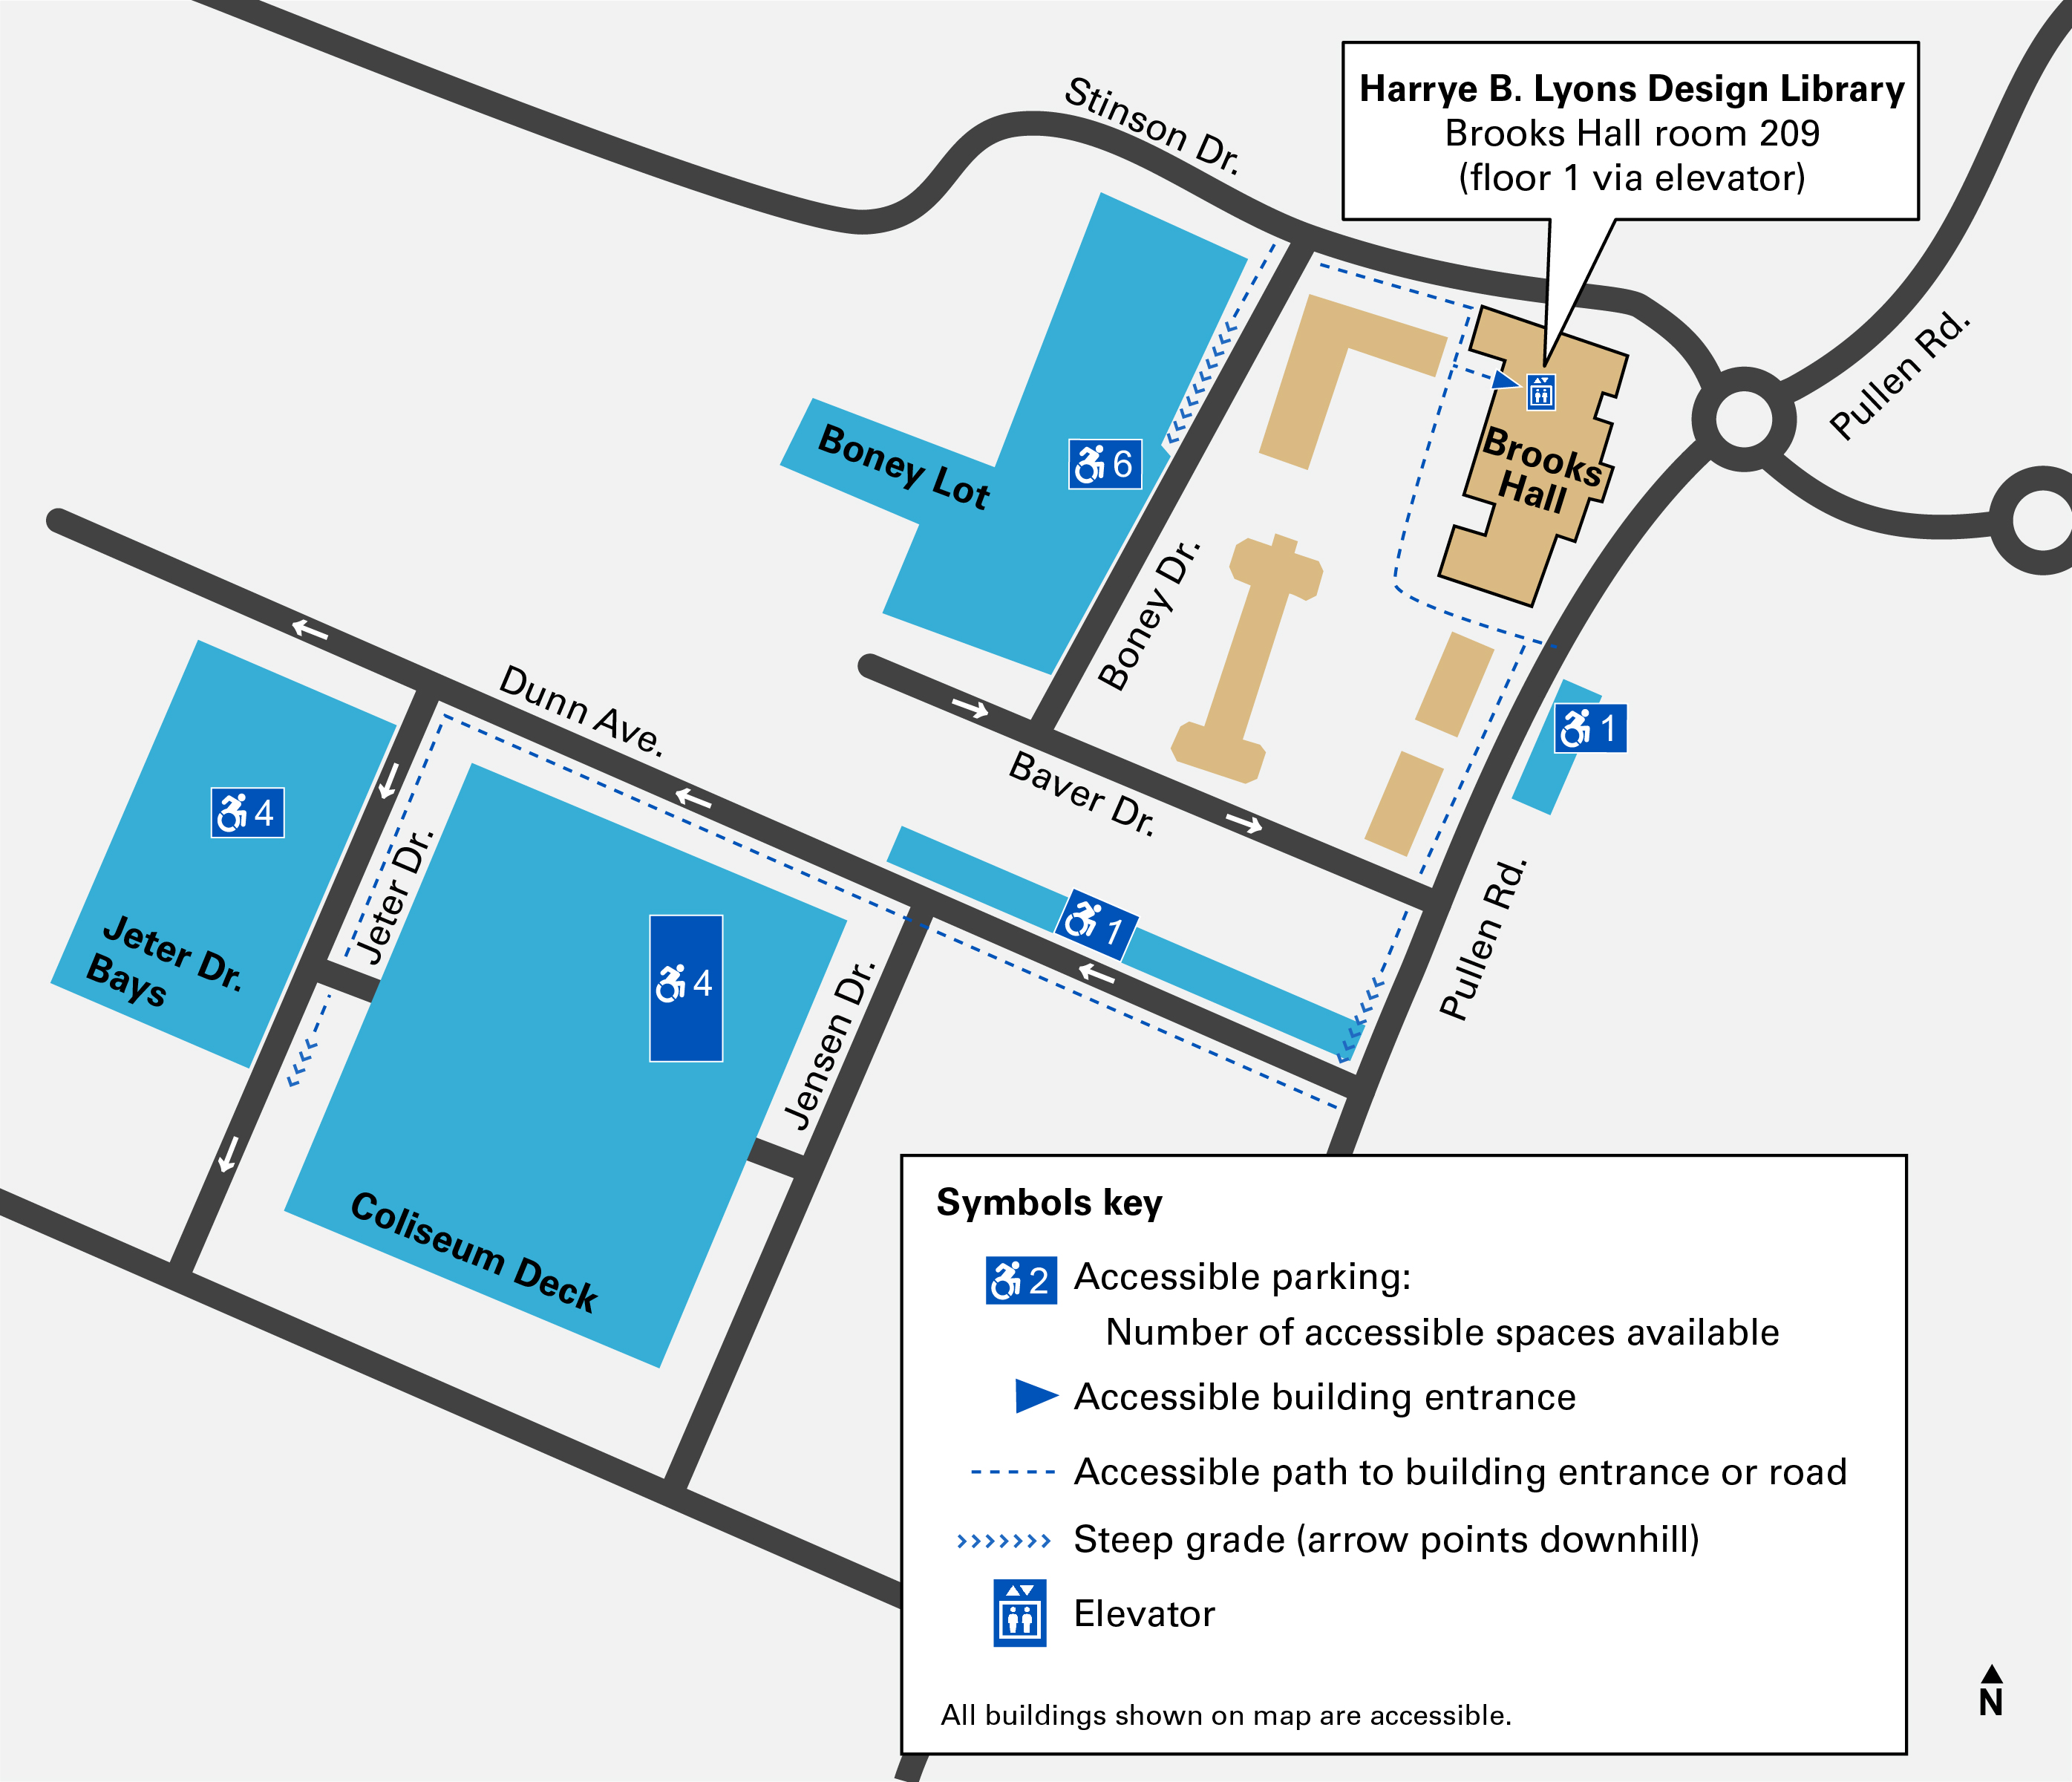 Map of accessible parking. The nearest space is on the street outside Brooks Hall, which requires a B permit. There are more spaces in the Boney Lot, also requiring a B permit. One spot on Dunn Avenue and more spots in the Jeter Drive bays require a C permit. Visitors and RE or CD permit holders can park in the Coliseum Deck.